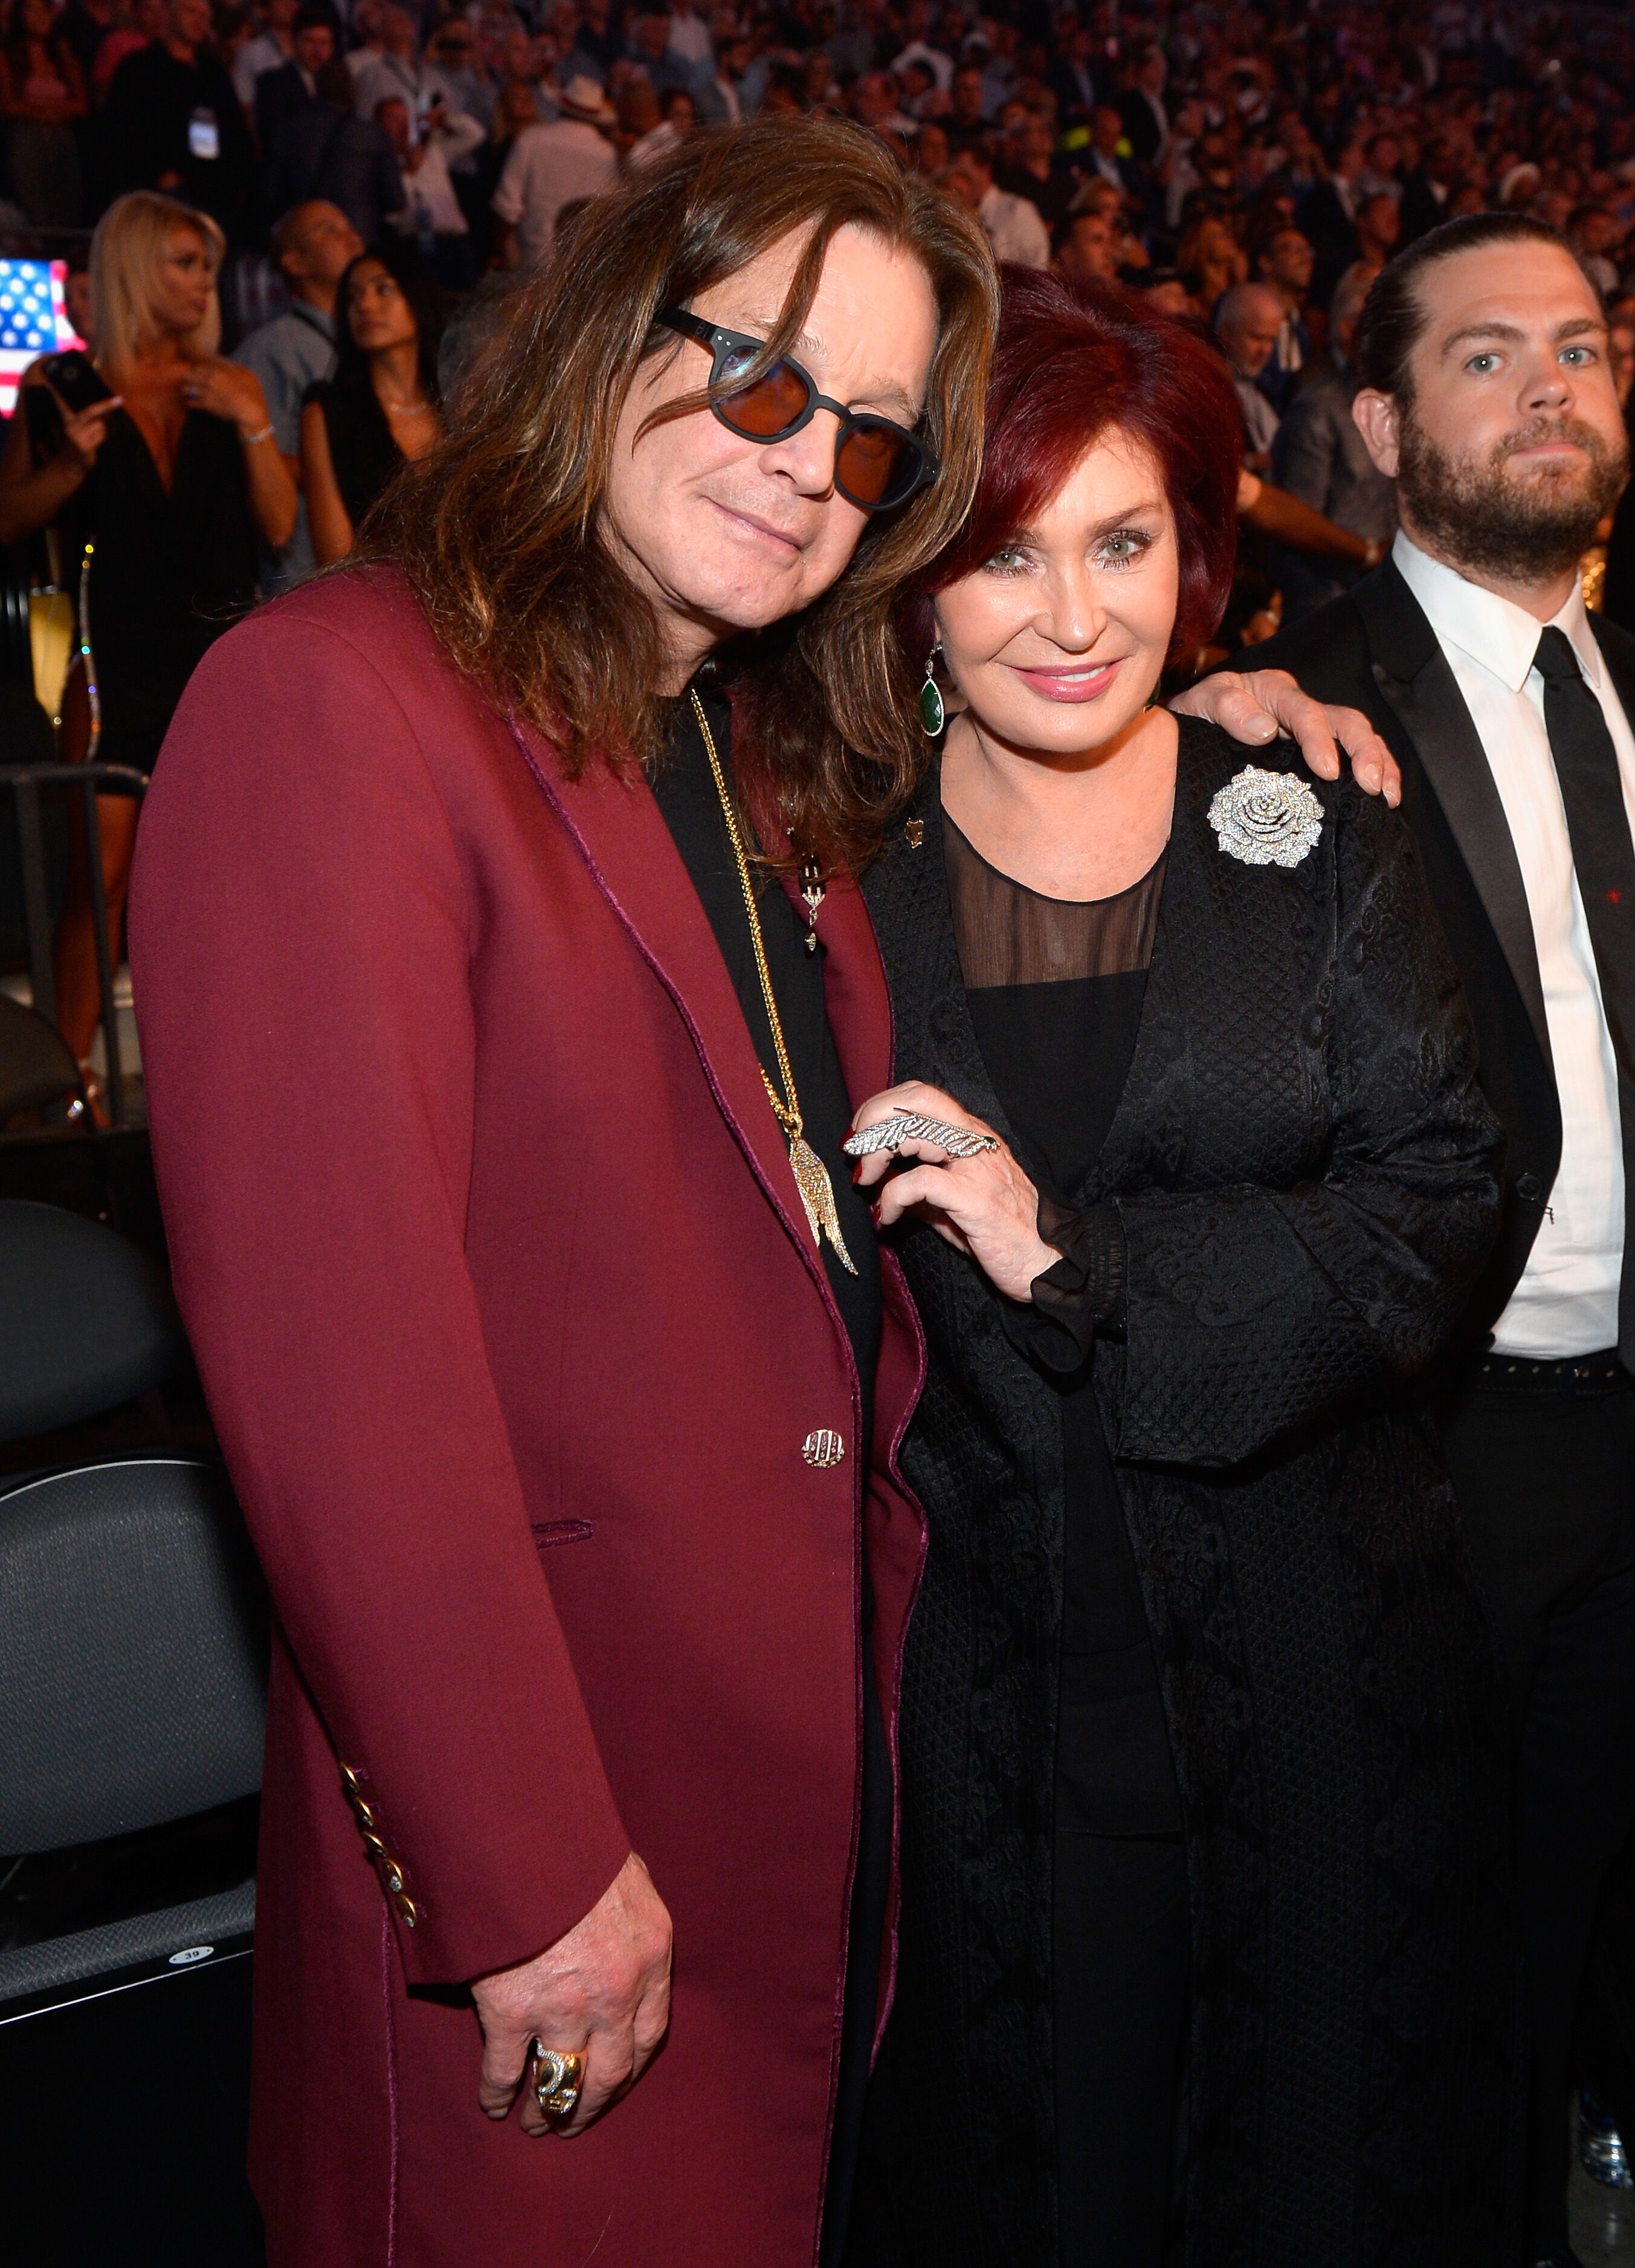 Ozzy Osbourne and Sharon Osbourne attend the Showtime, WME IME and Mayweather Promotions VIP Pre-Fight party for Mayweather vs. McGregor. | Source: Getty Images